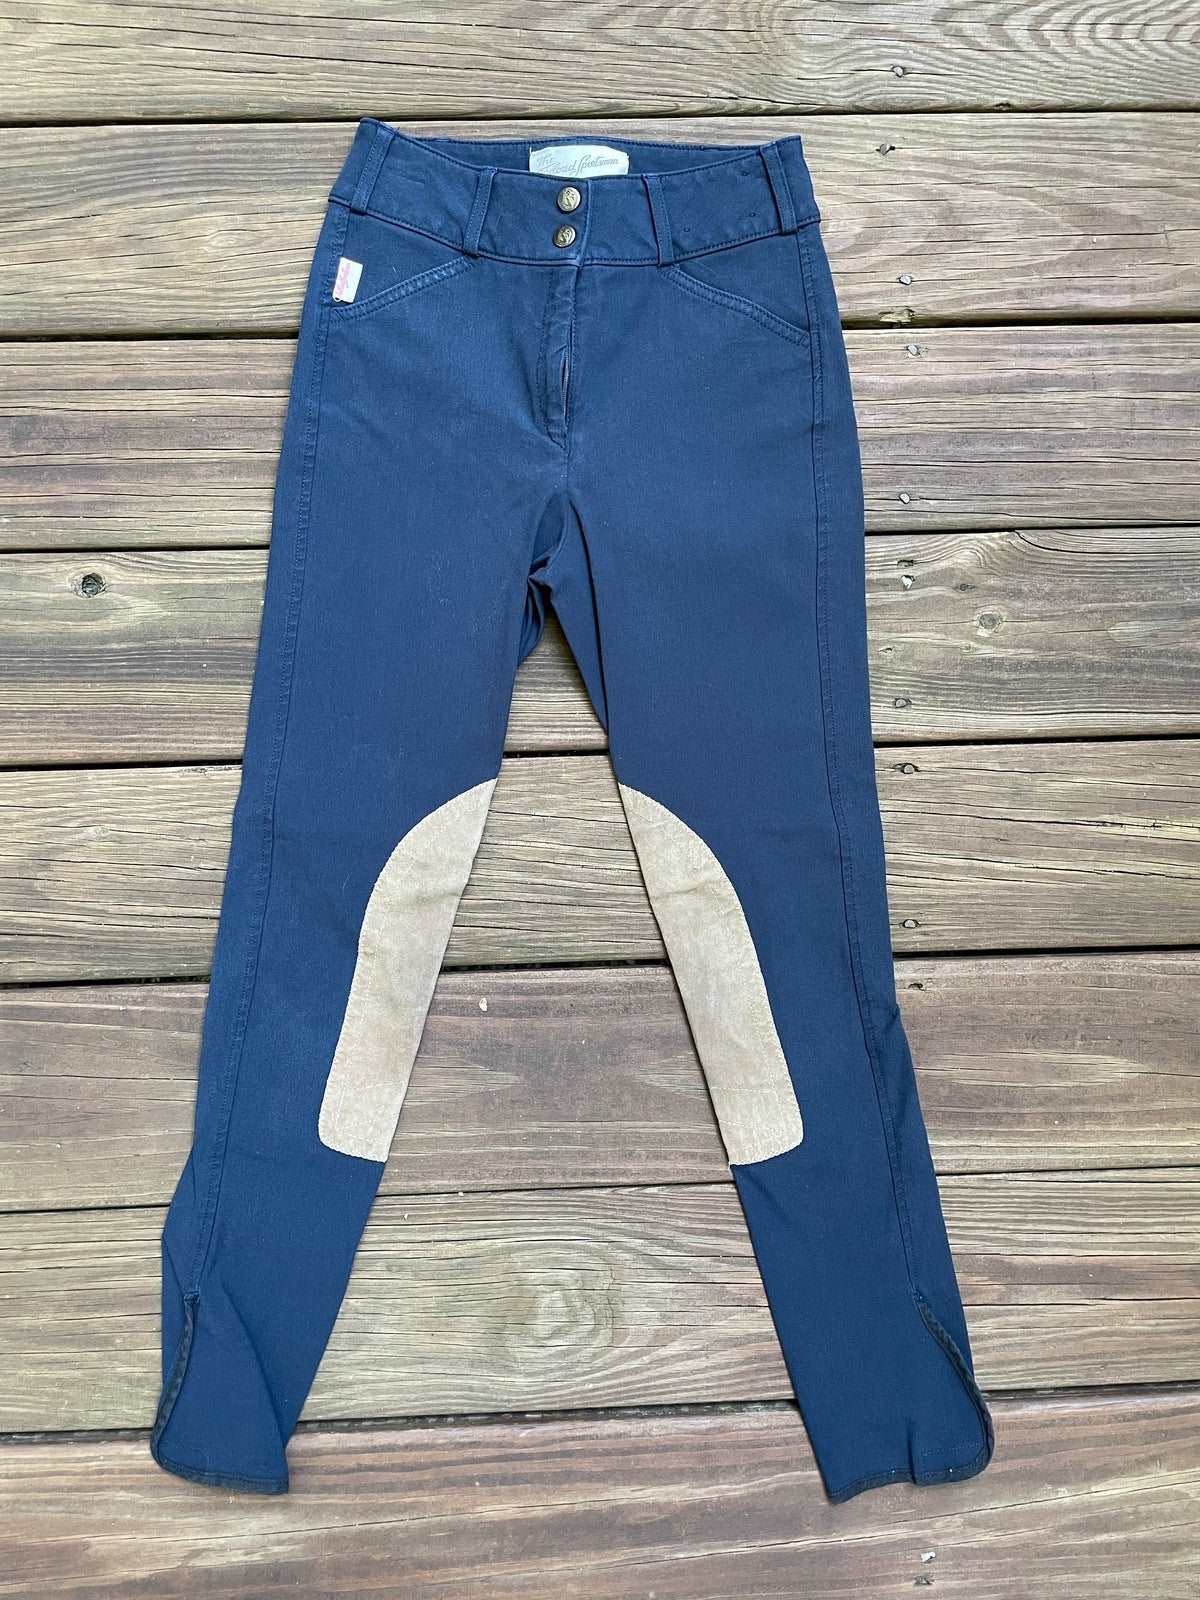 ThriftedEquestrian Clothing 24R Tailored Sportsman Vintage Knee Patch Breeches - 24R